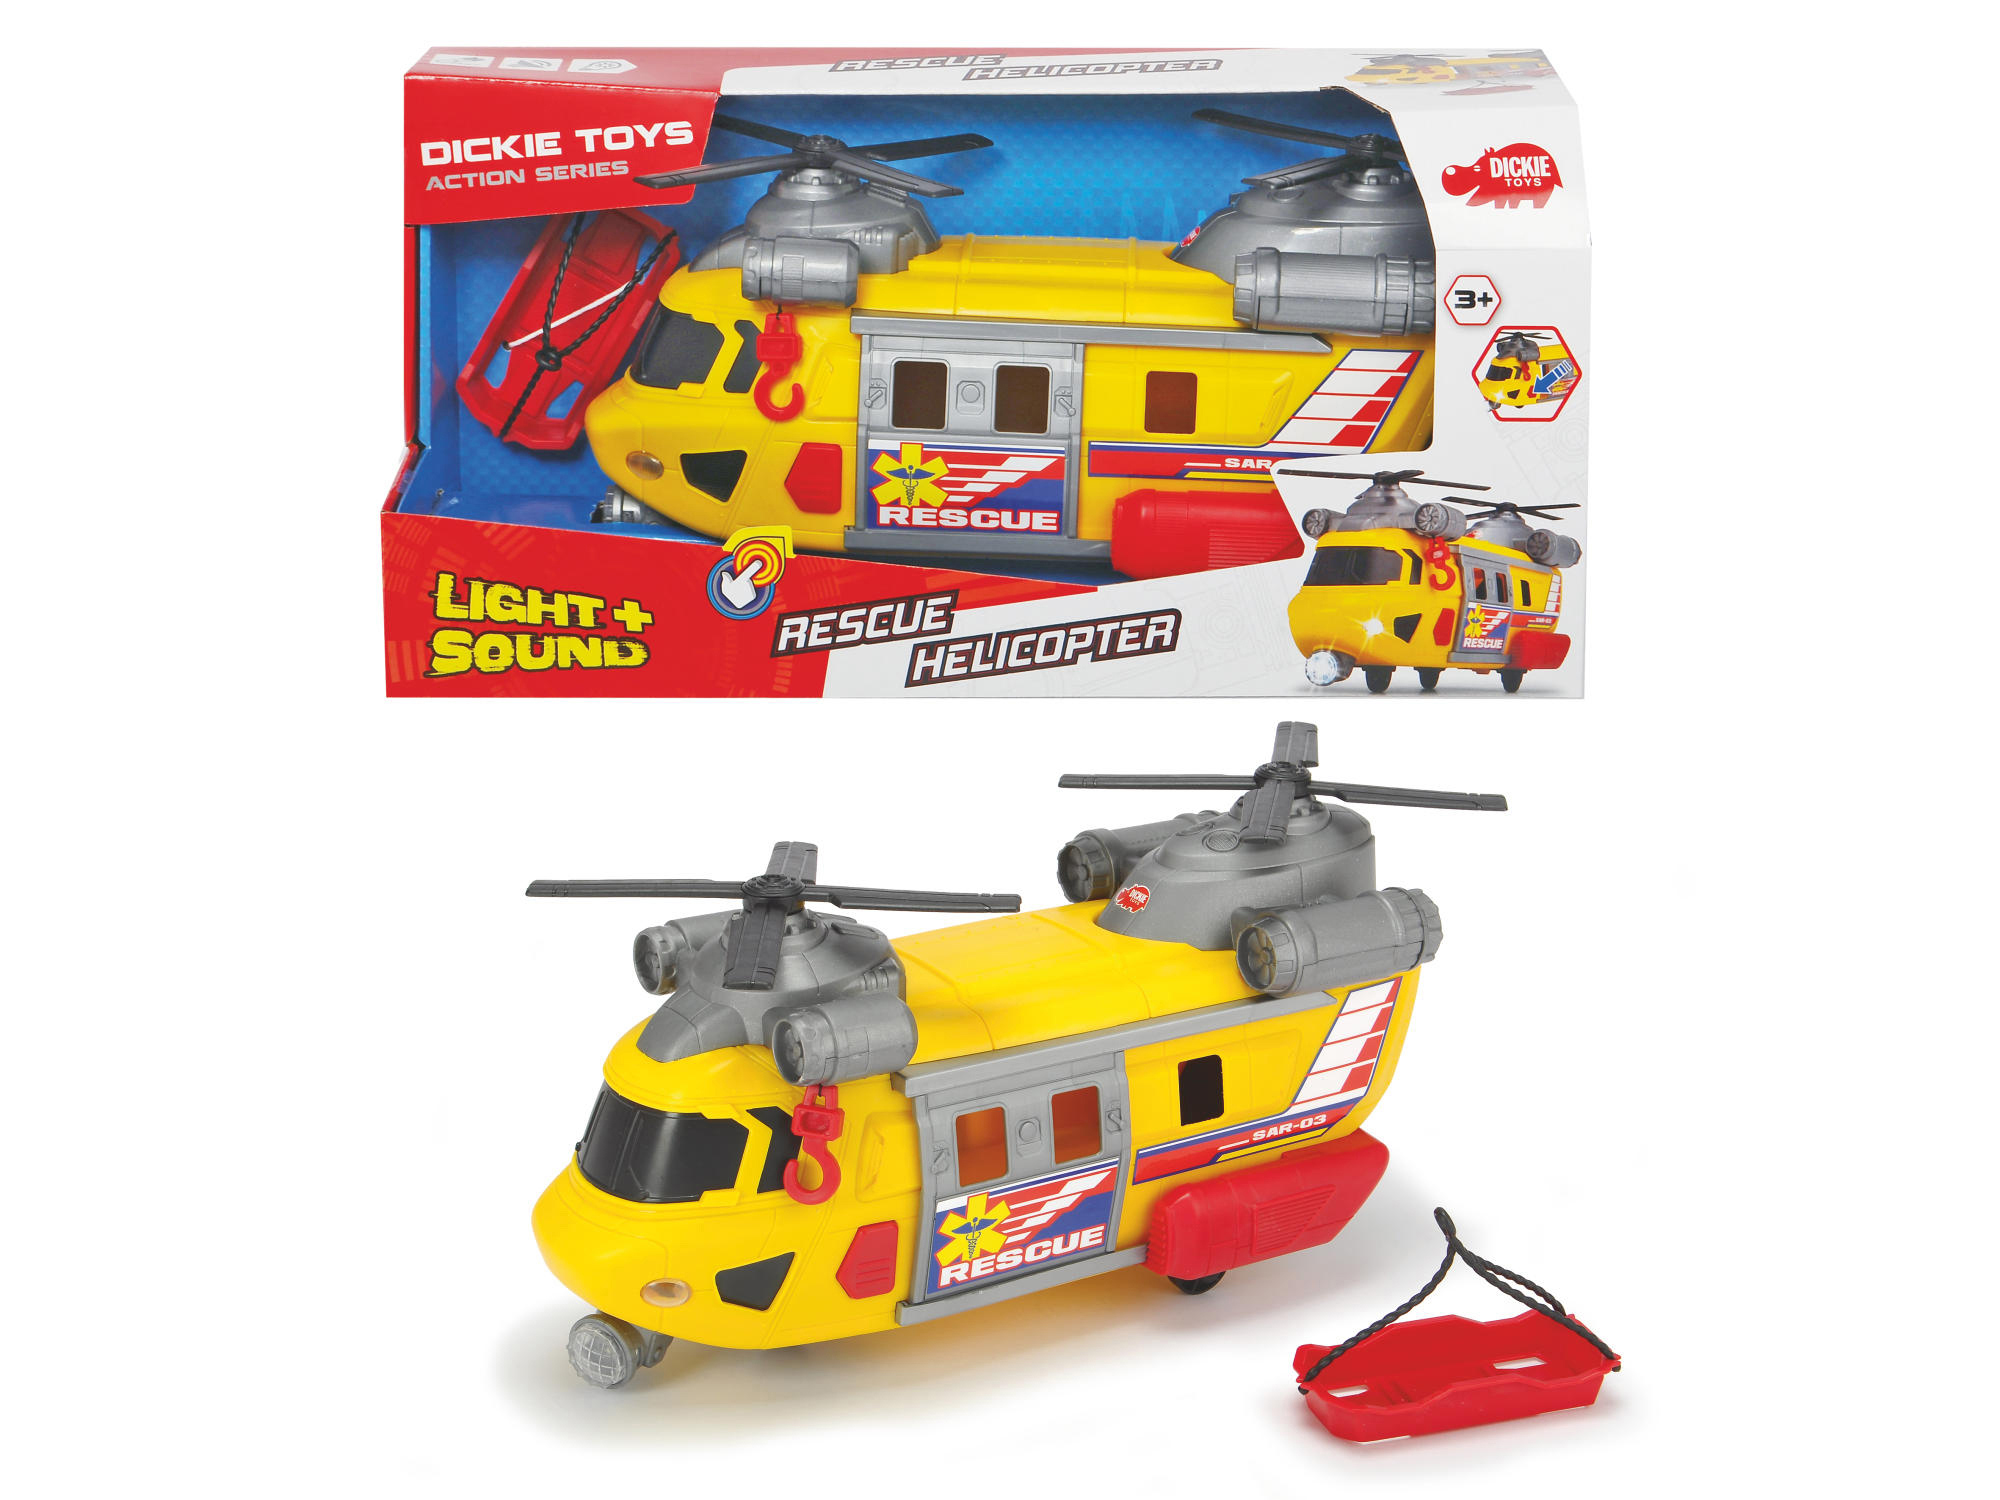 DICKIE-TOYS Spielzeughelikopter Rescue Mehrfarbig